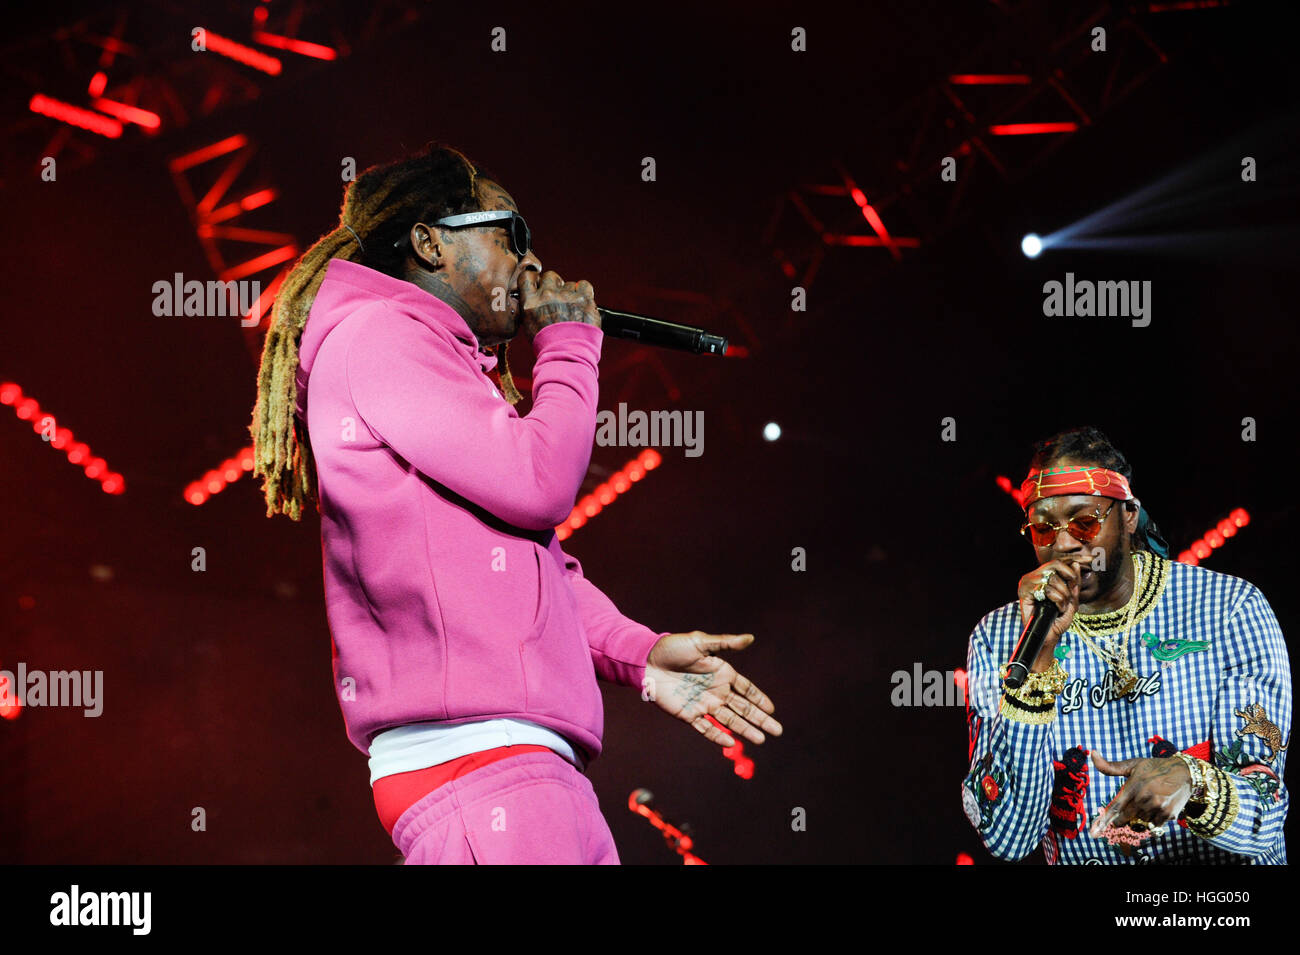 373 Experience Staples Center Concert Presented By Sprite Performances By  Lil Wayne 2 Chainz Tory Lanez A Ap Ferg Fetty Wap Ty Dolla Ign Kodak Black  Photos & High Res Pictures - Getty Images